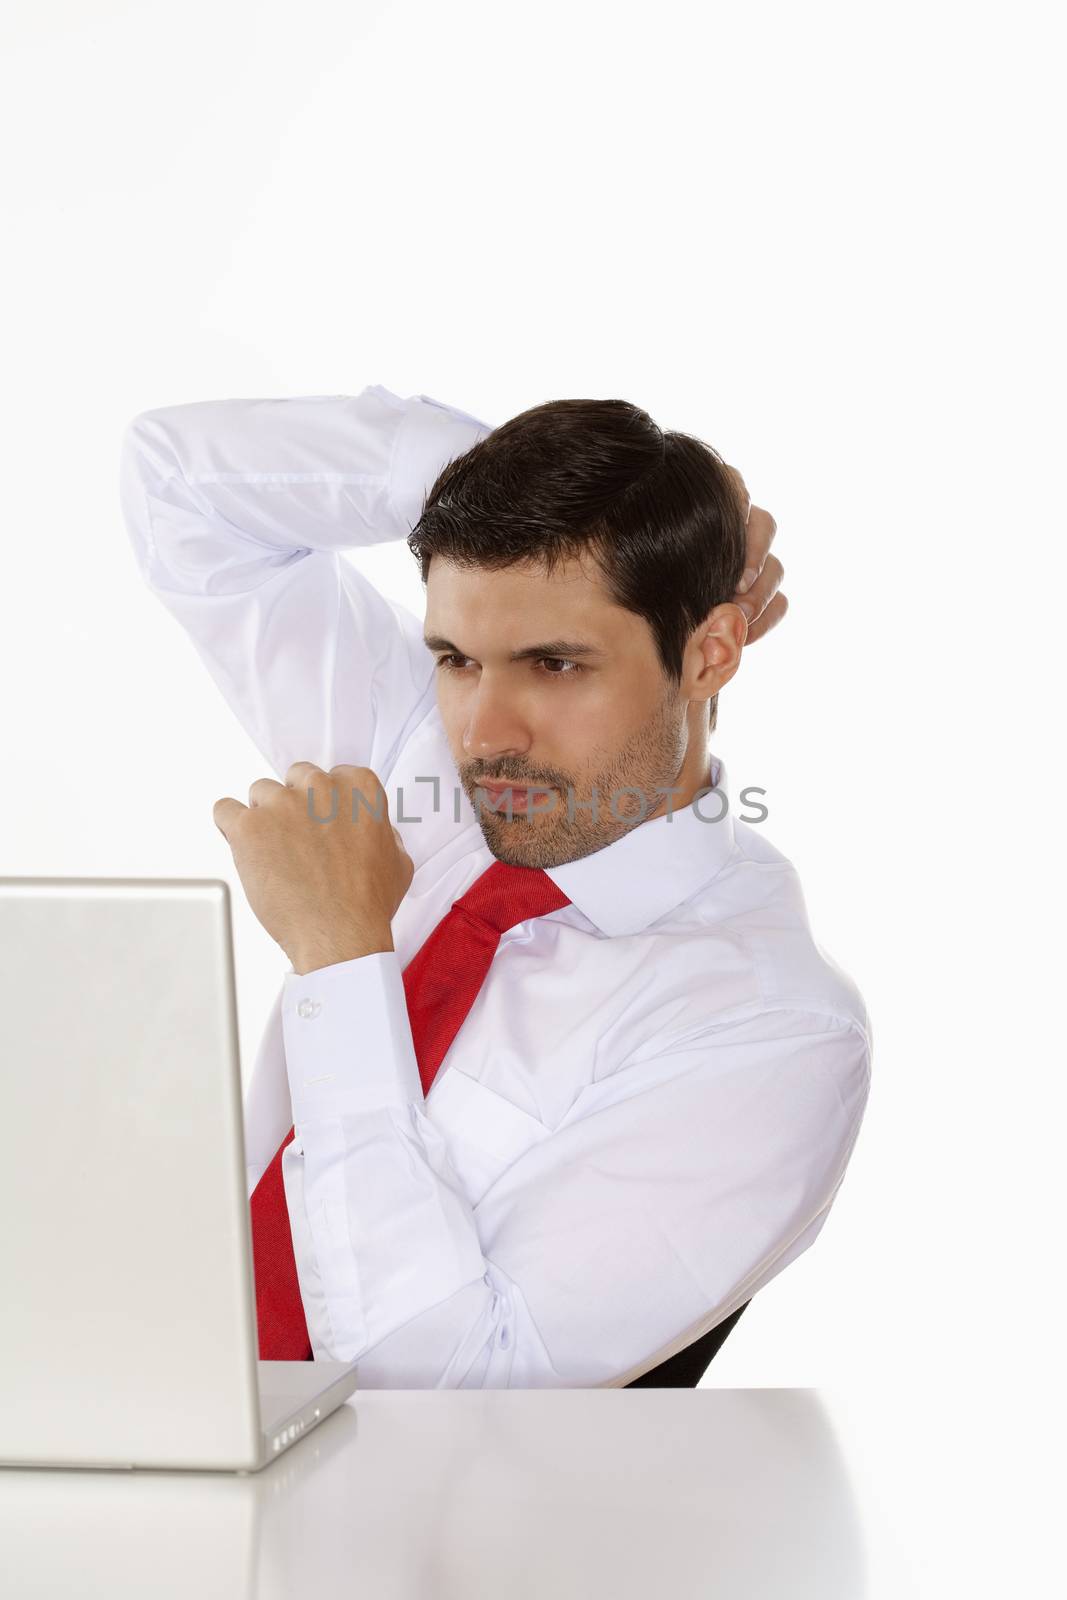 young business executive in white shirt behind desk with laptop